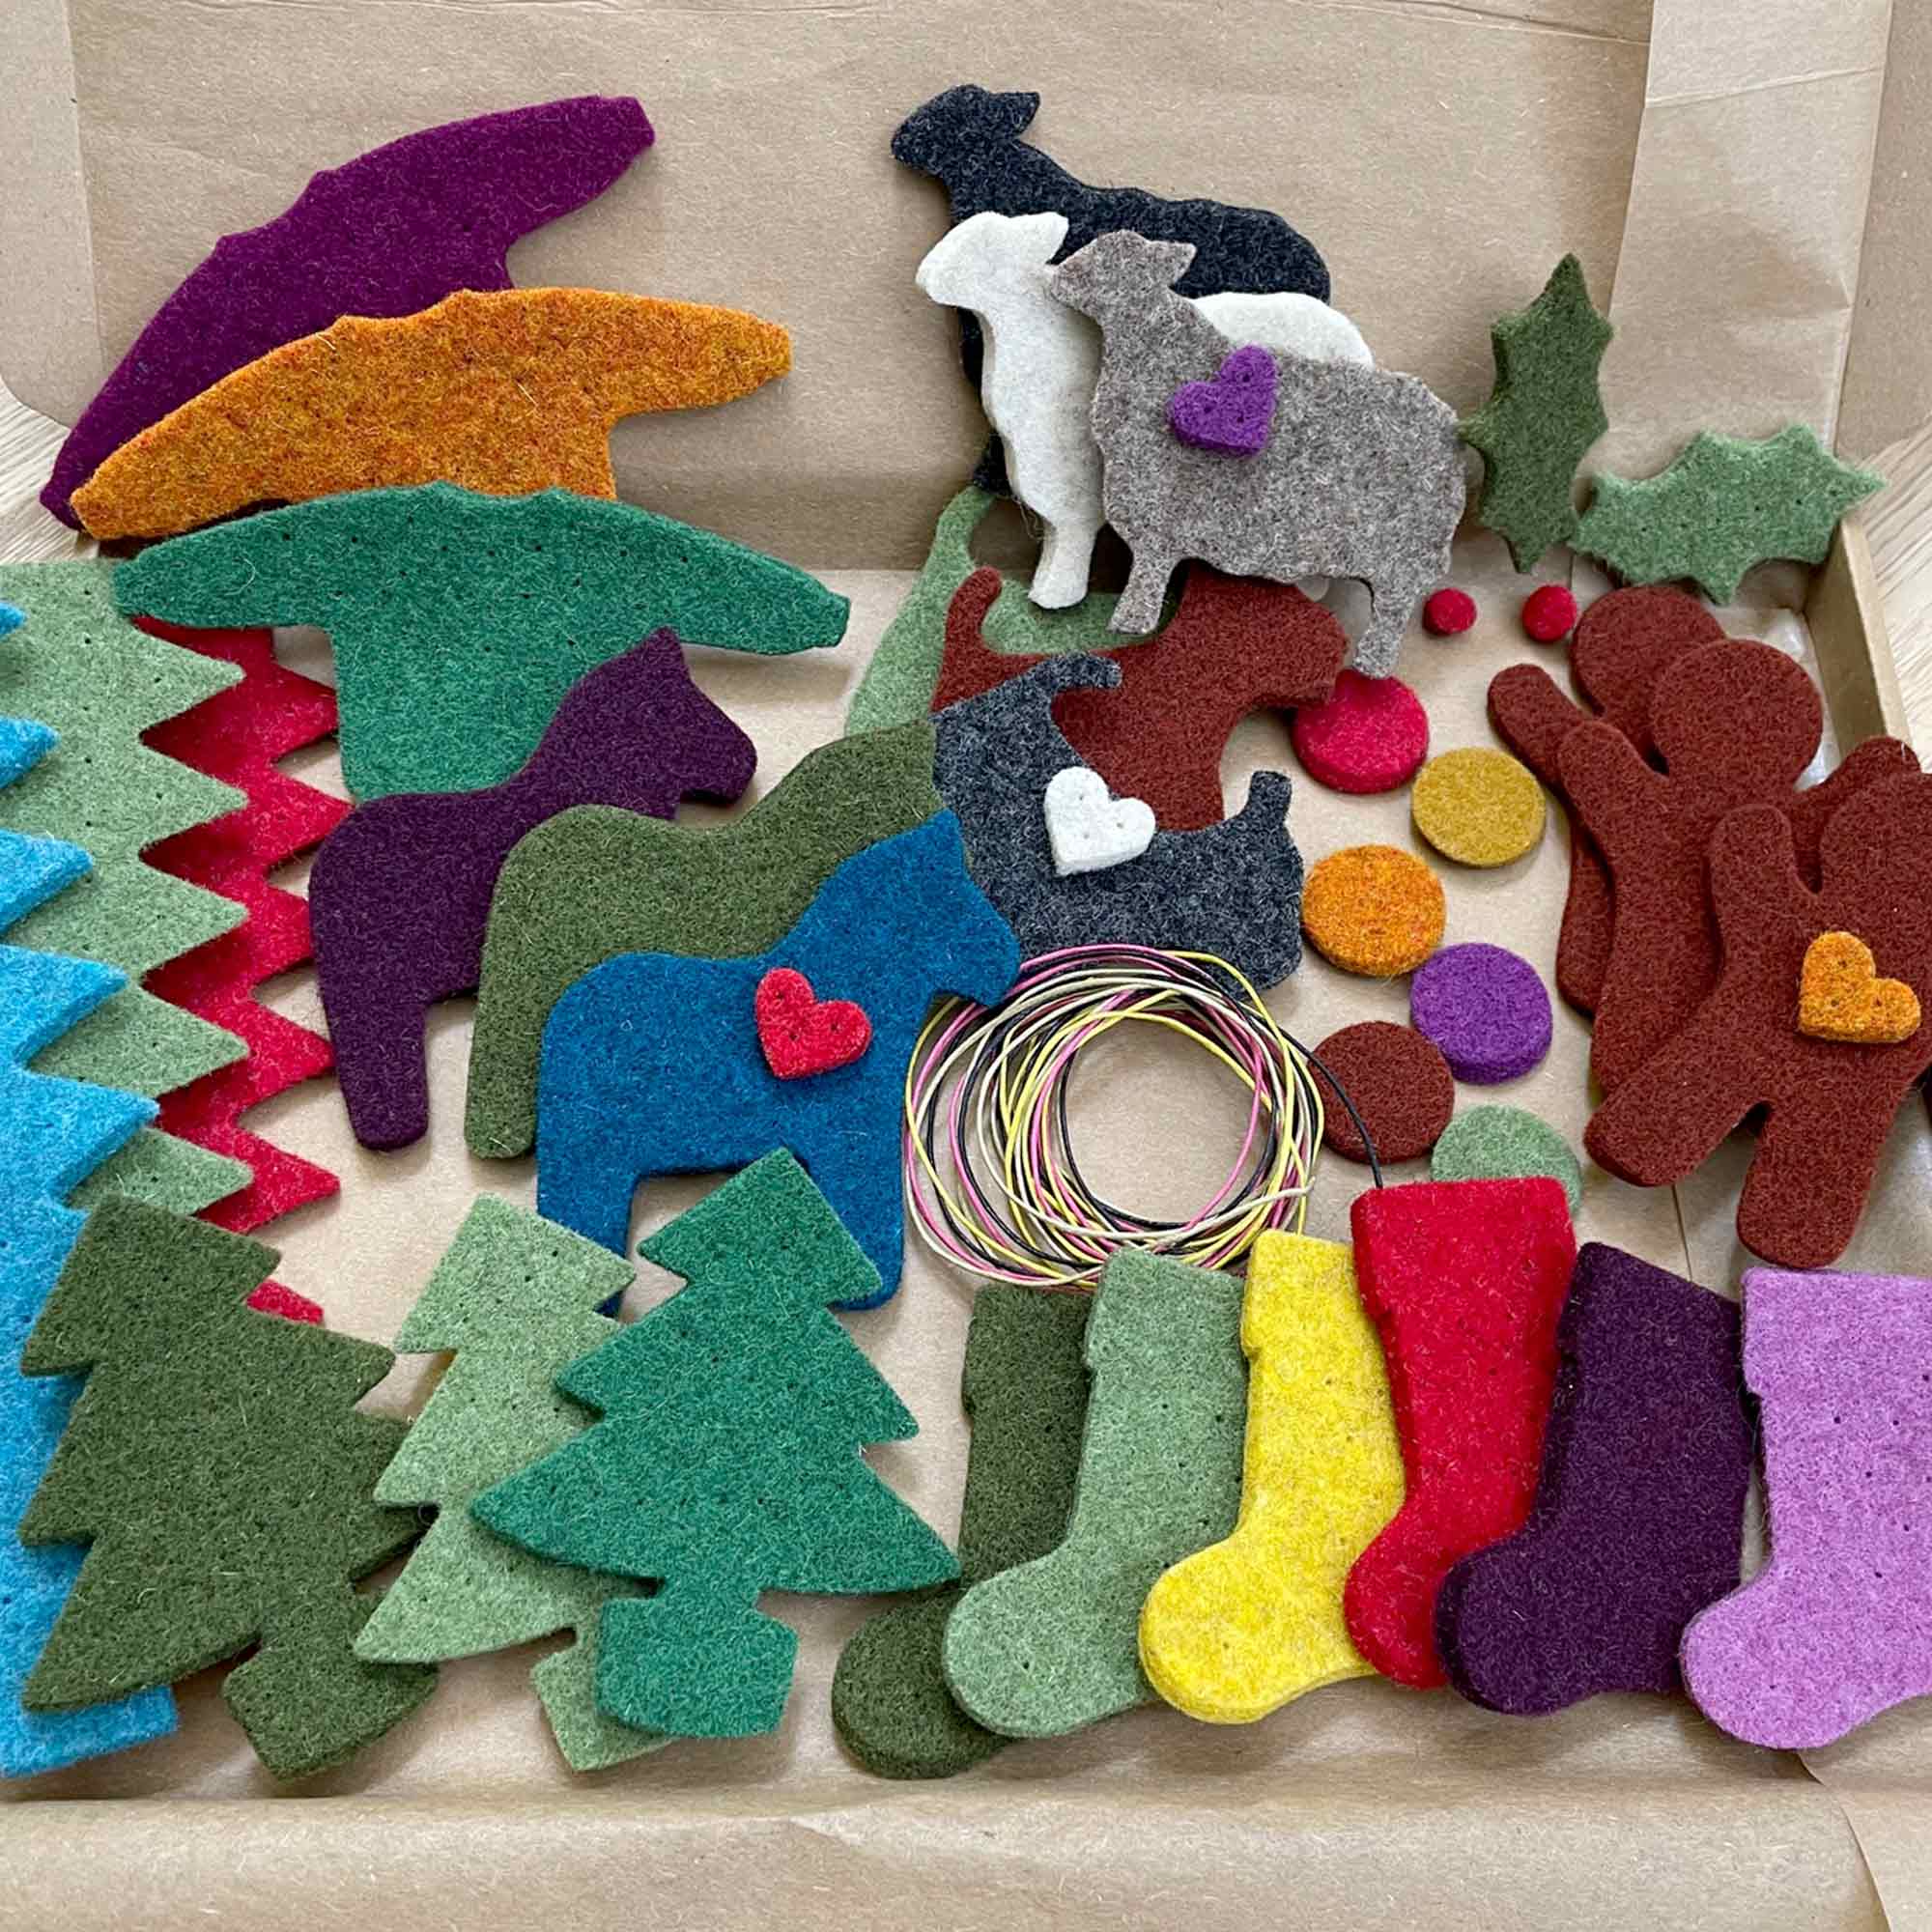 Festive Selection 33 Felt Shapes in thick wool felt ideal for